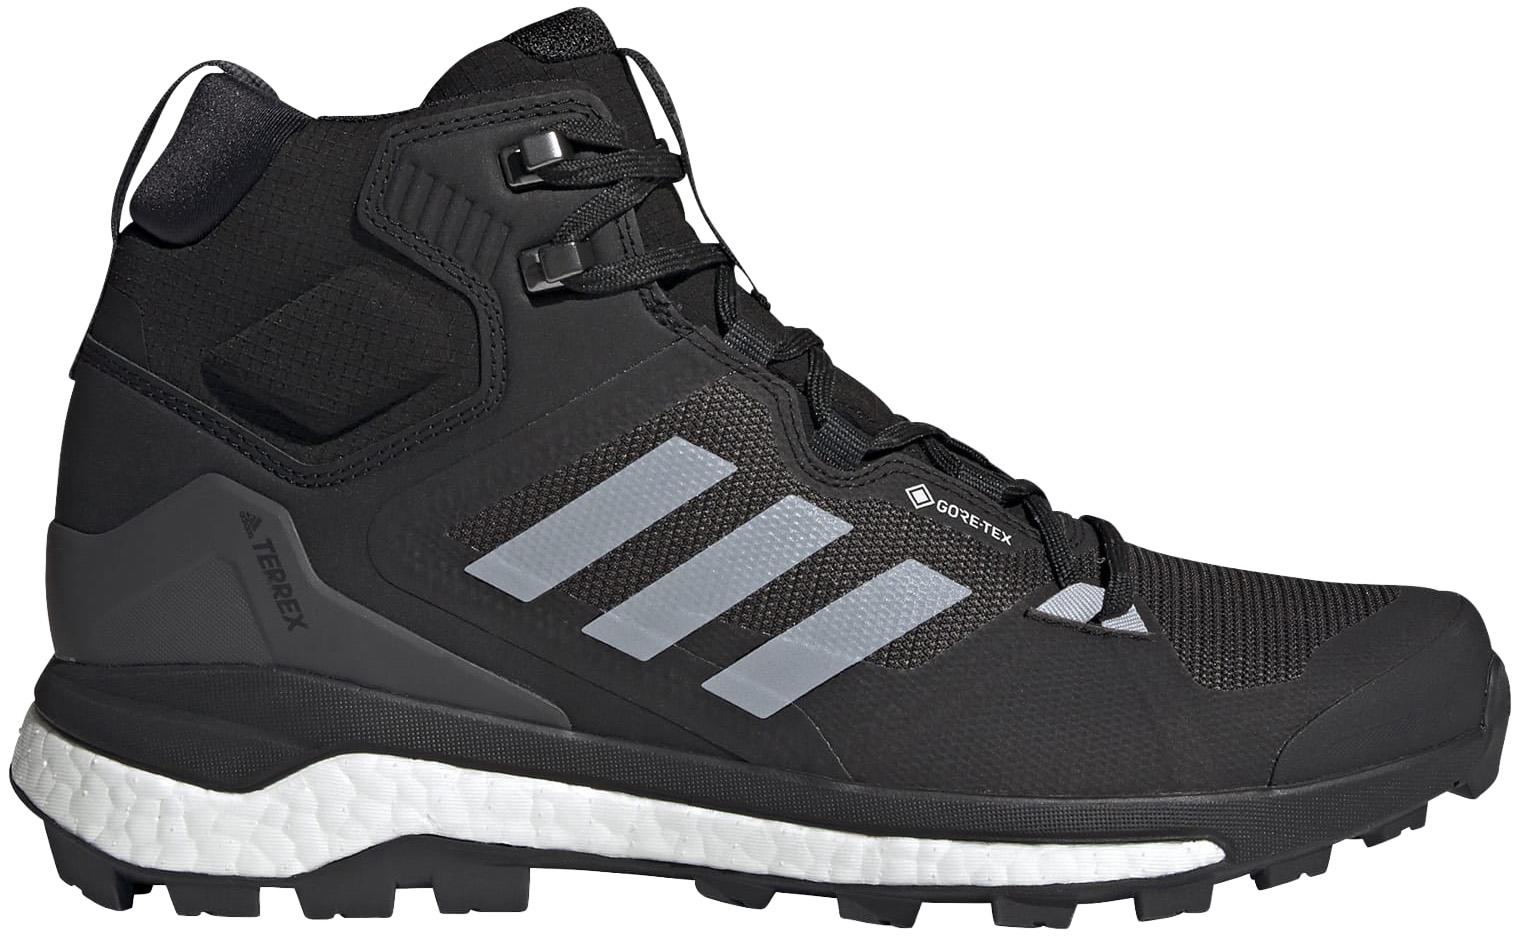 Adidas Terrex Skychaser 2 Mid Gore-tex Hiking Shoes - Core Black